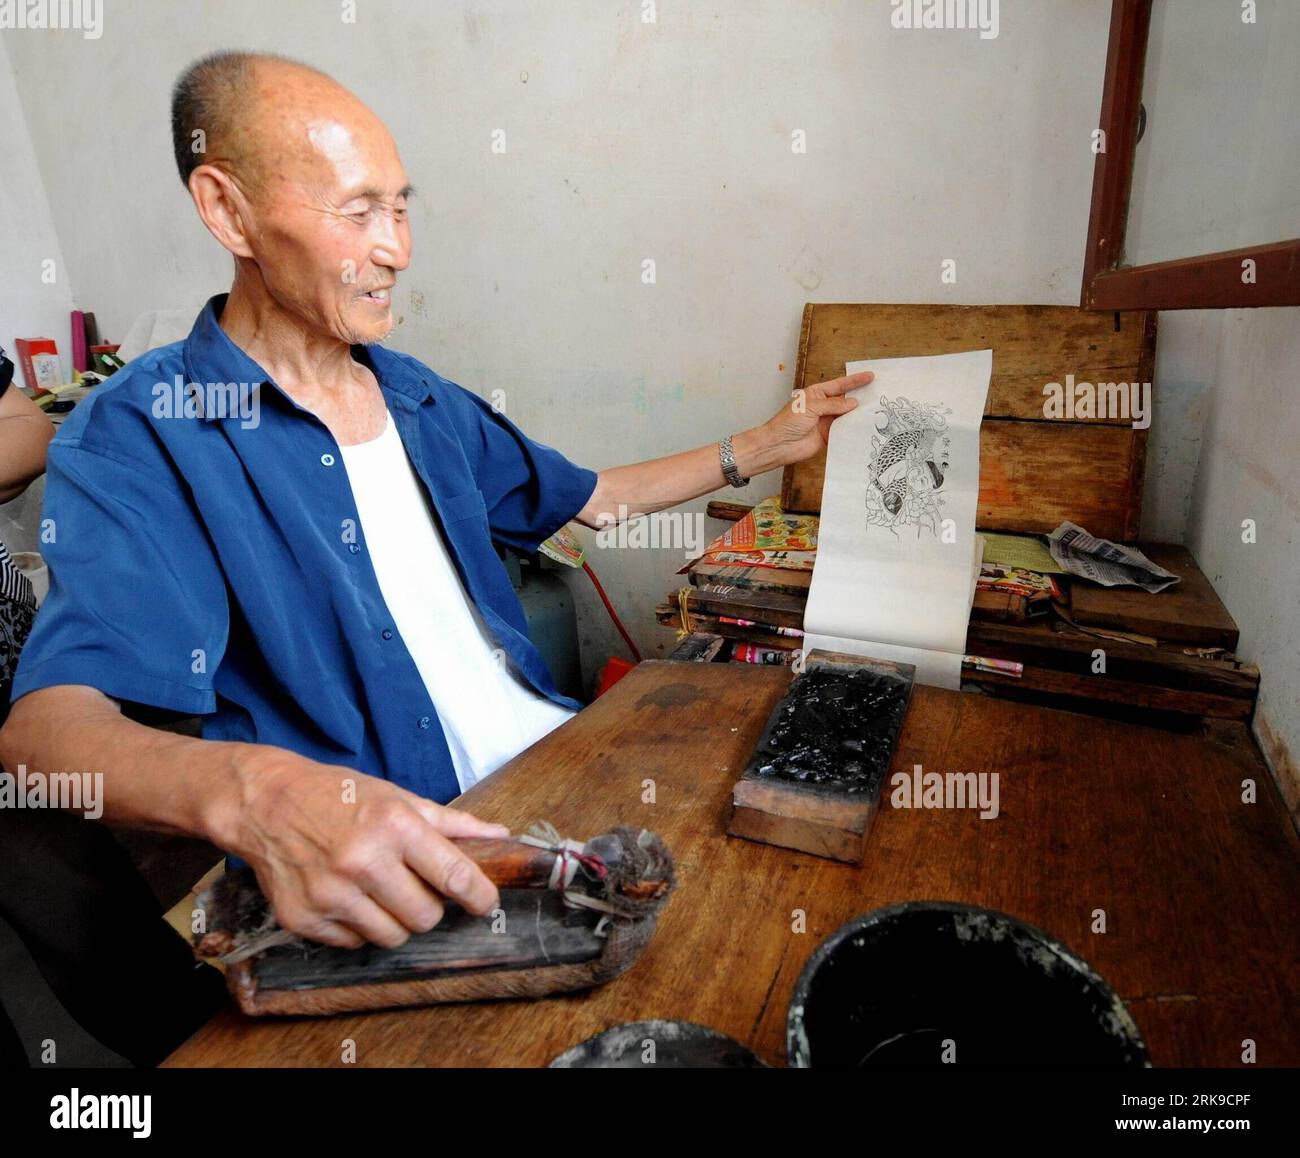 Bildnummer: 54168697  Datum: 24.06.2010  Copyright: imago/Xinhua Xi an, June 24, 2010 (Xinhua) -- Folk artist Tai Yu prints the woodcut onto a paper at his studio in Fengxiang County of Baoji City, northwest China s Shaanxi Province, June 24, 2010. The 77 years old folk artist Tai Yu learnt the skills of making spring festival woodcut prints when he was a kid. Through his more than 60 years practices in woodcut prints Tai inherited traditional skills from ancestor artists and drew inspirations form stone carving, paper-cutting, and embroidering and formed his own style. His woodcut print works Stock Photo